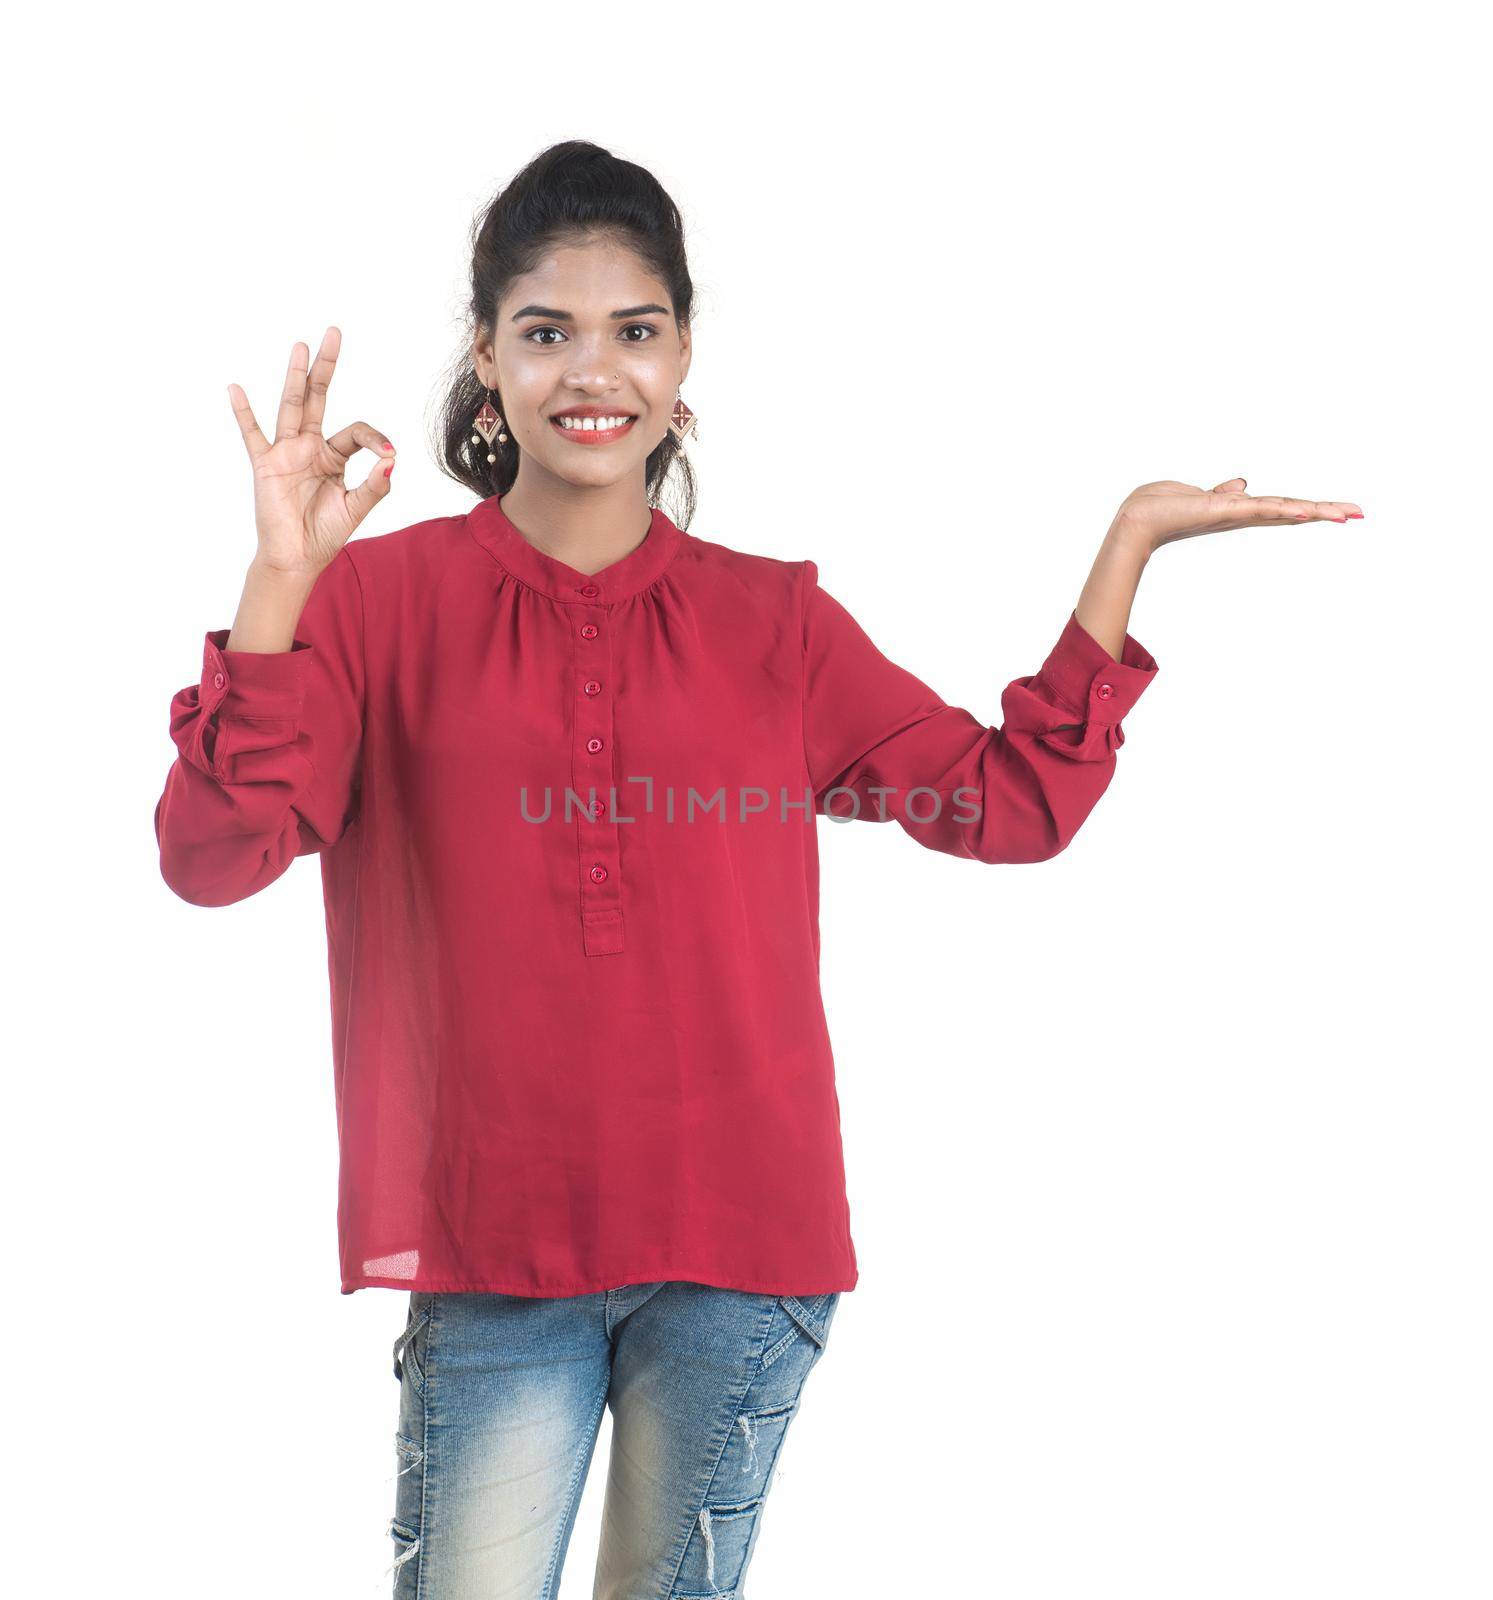 Young smiling girl pointing fingers to copy space on a white background by DipakShelare